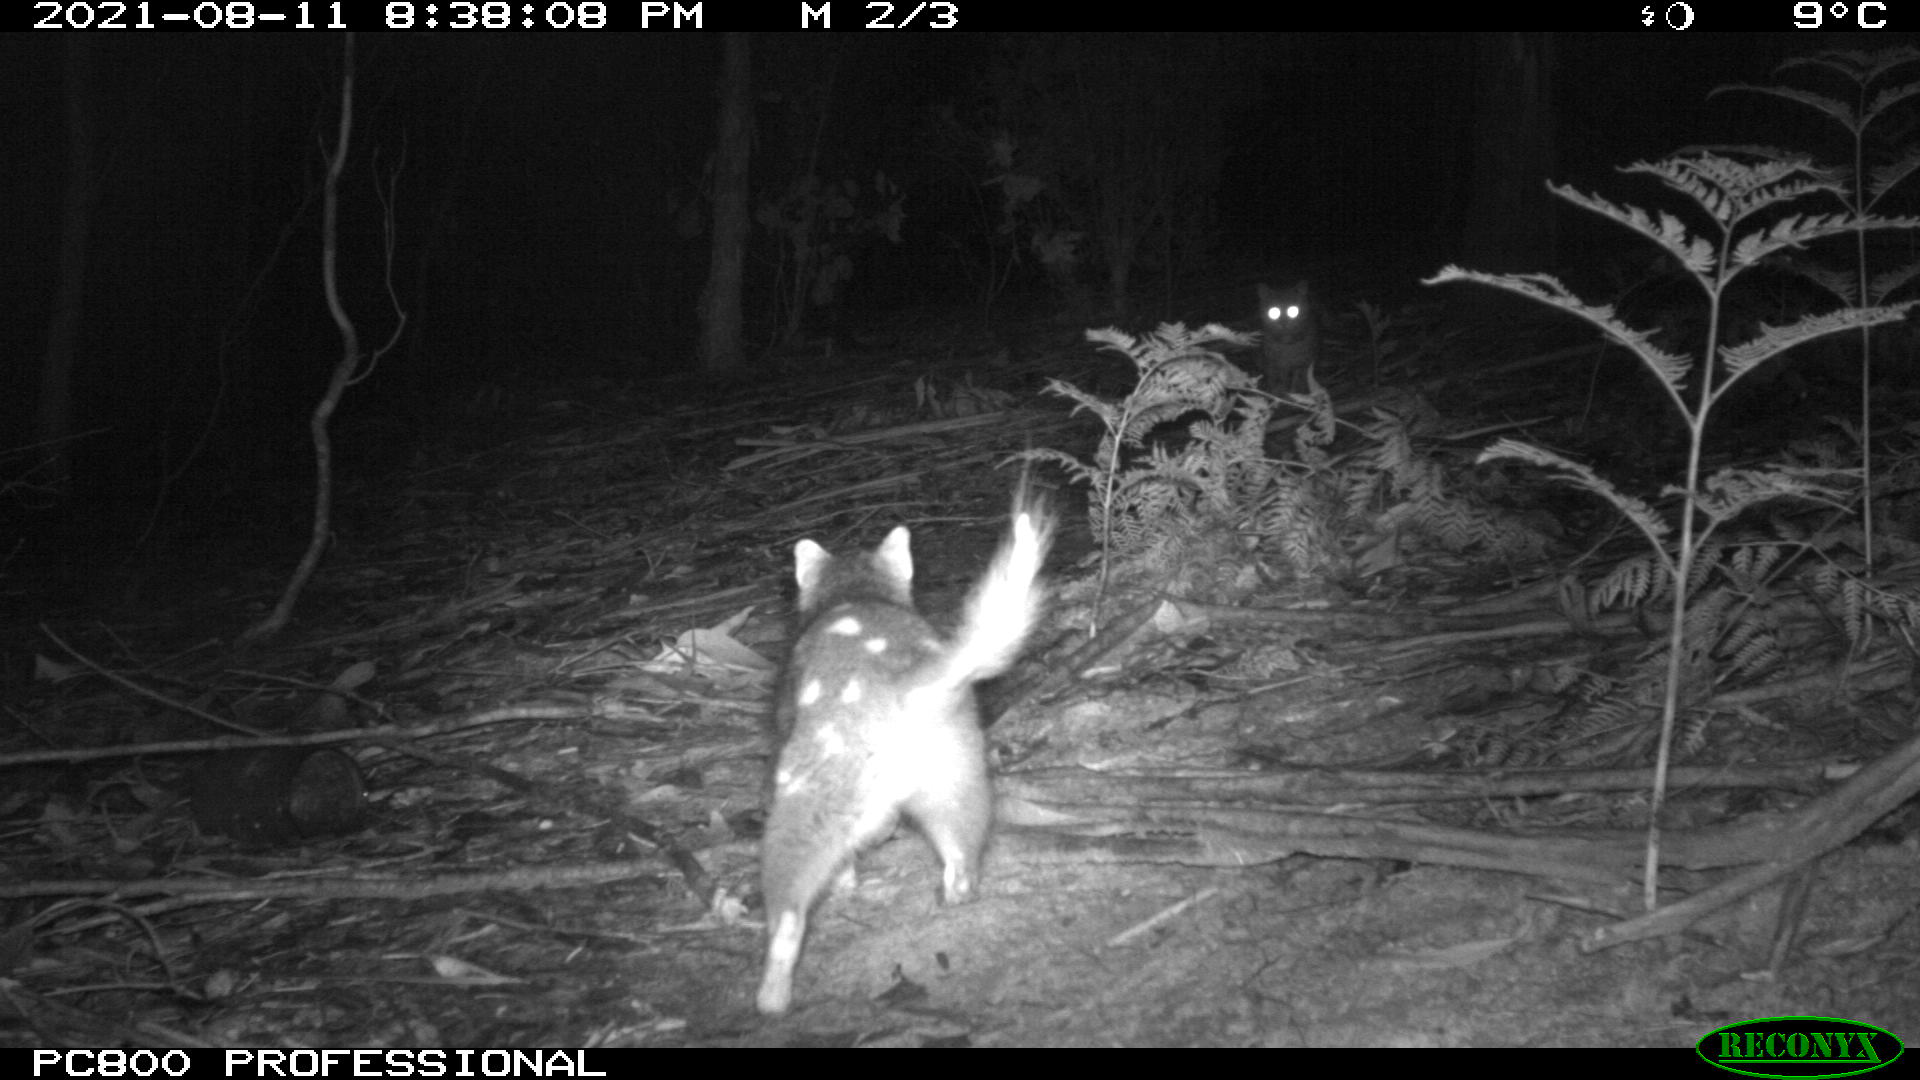 Camera trap image of a quoll running away from the camera with a feral cat watching in the distance